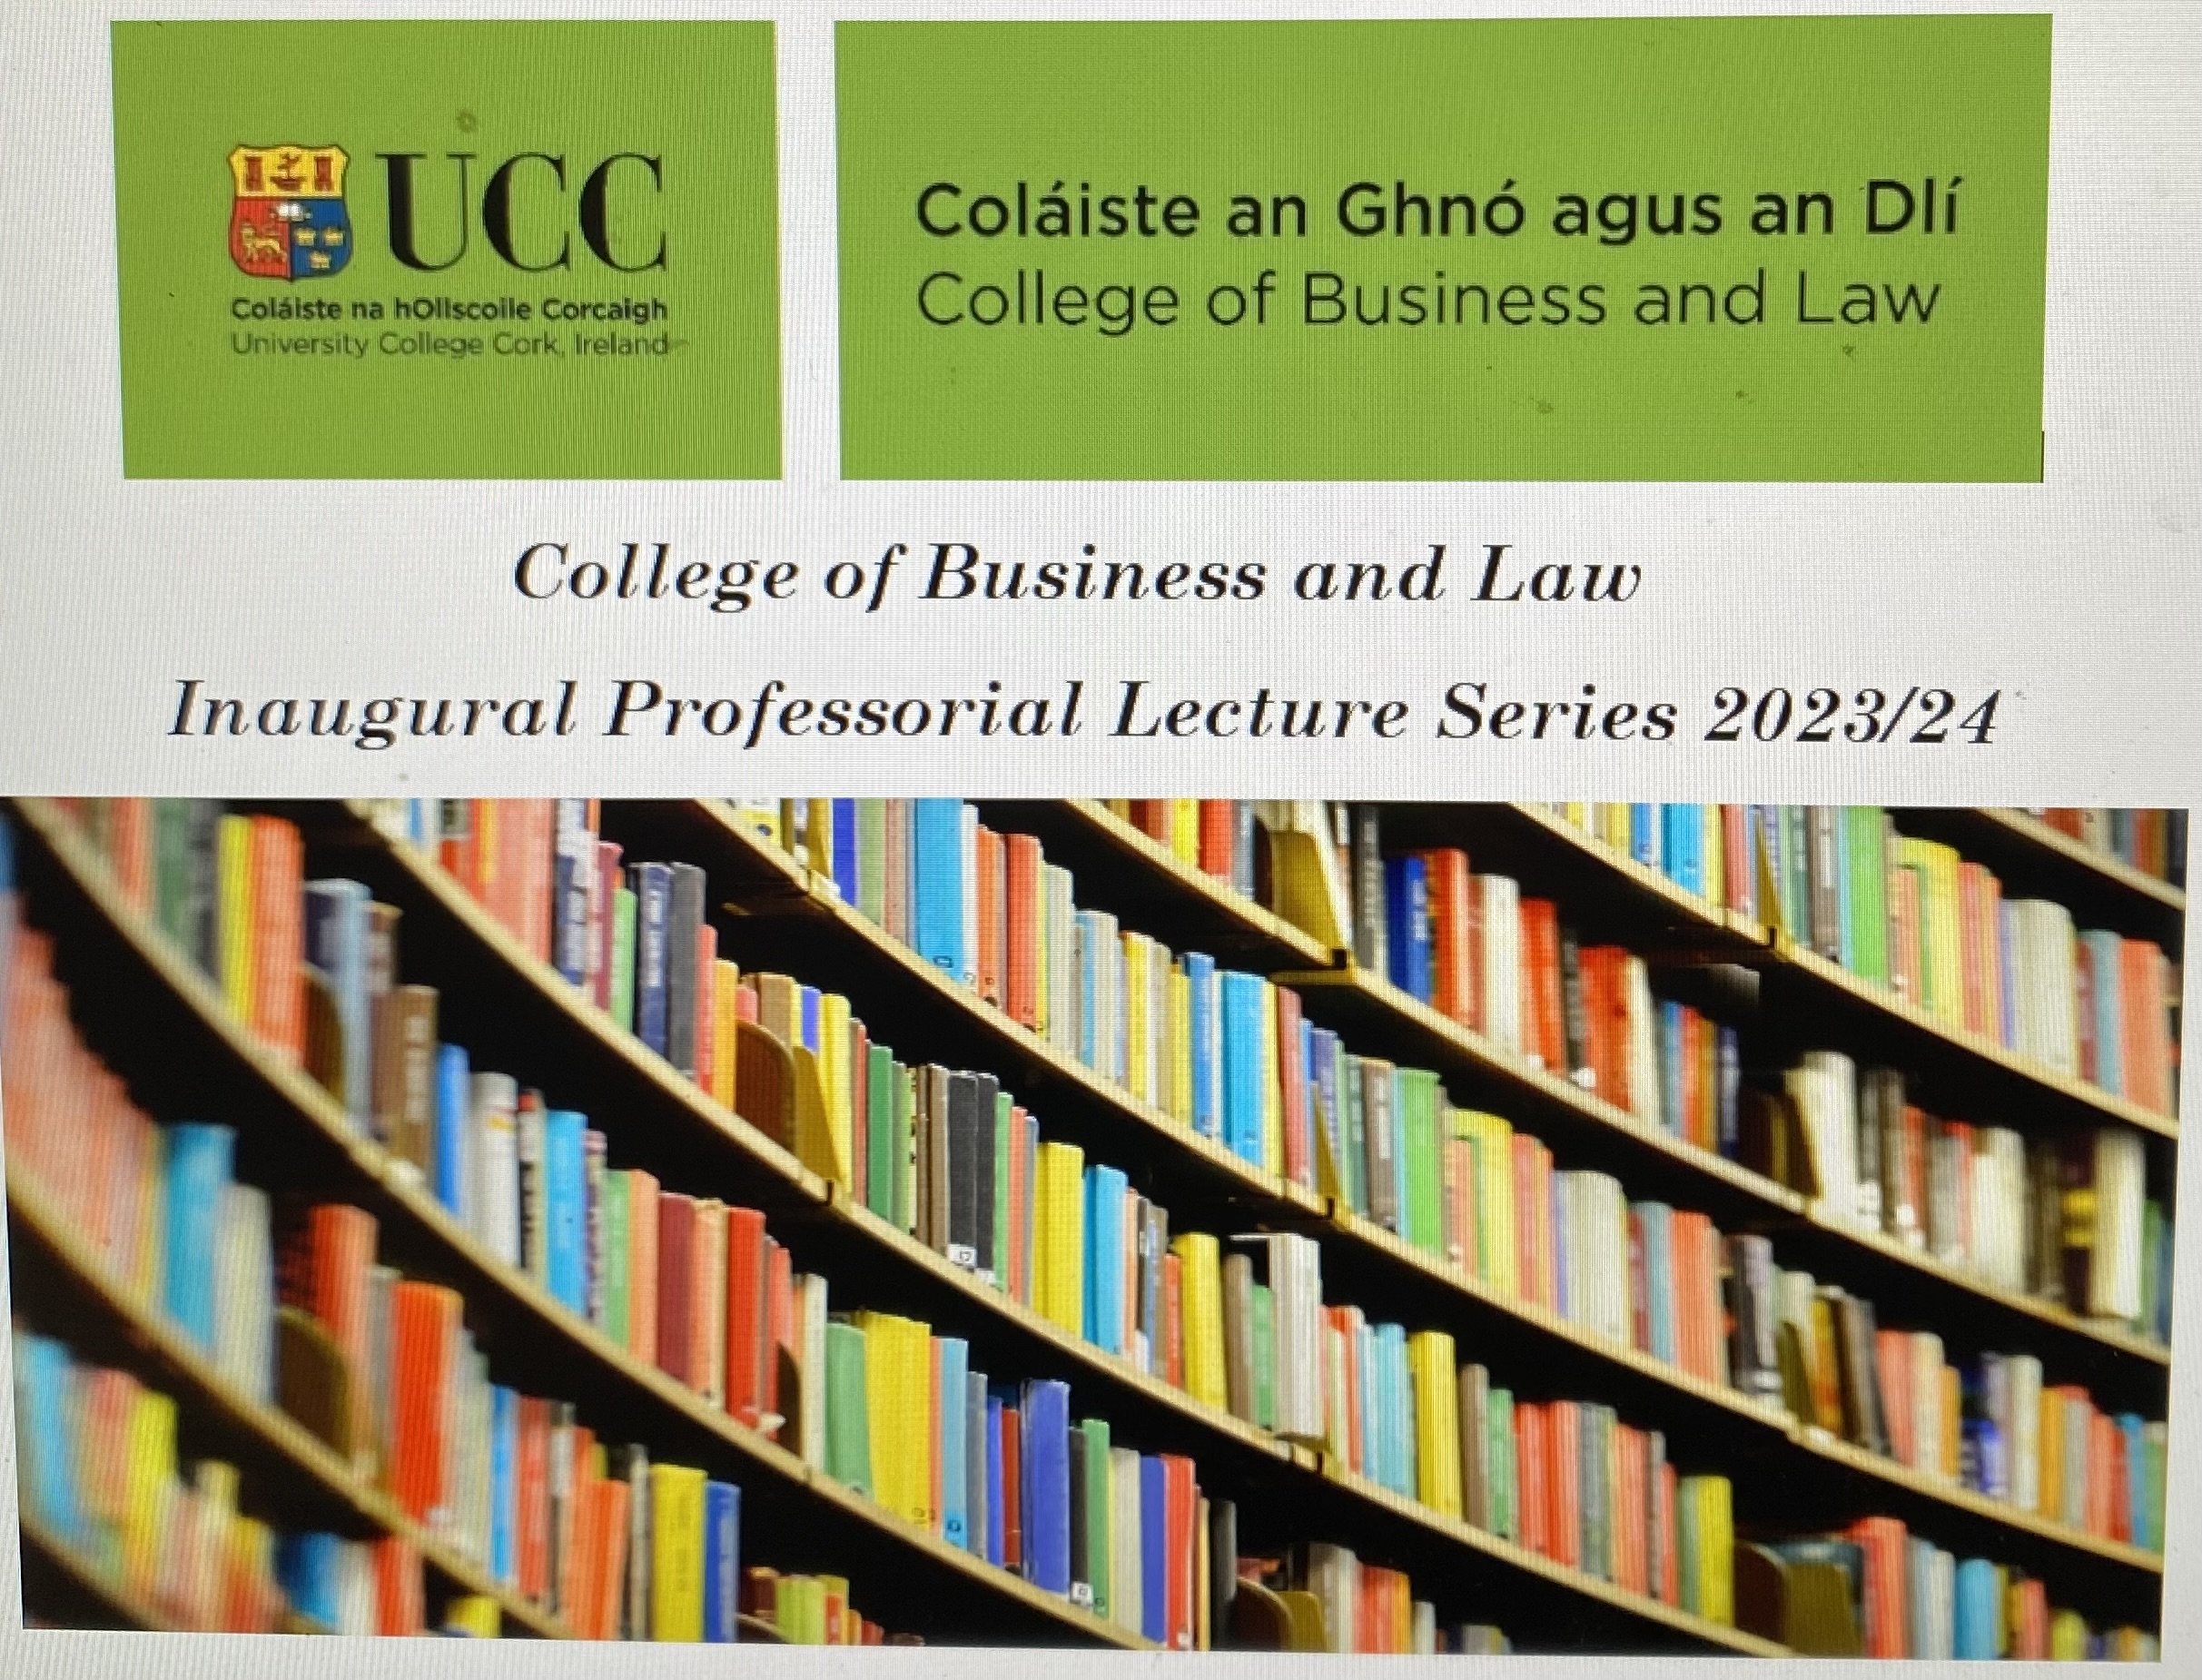 College Inaugural Professorial Lecture Series Continues into Spring 2024